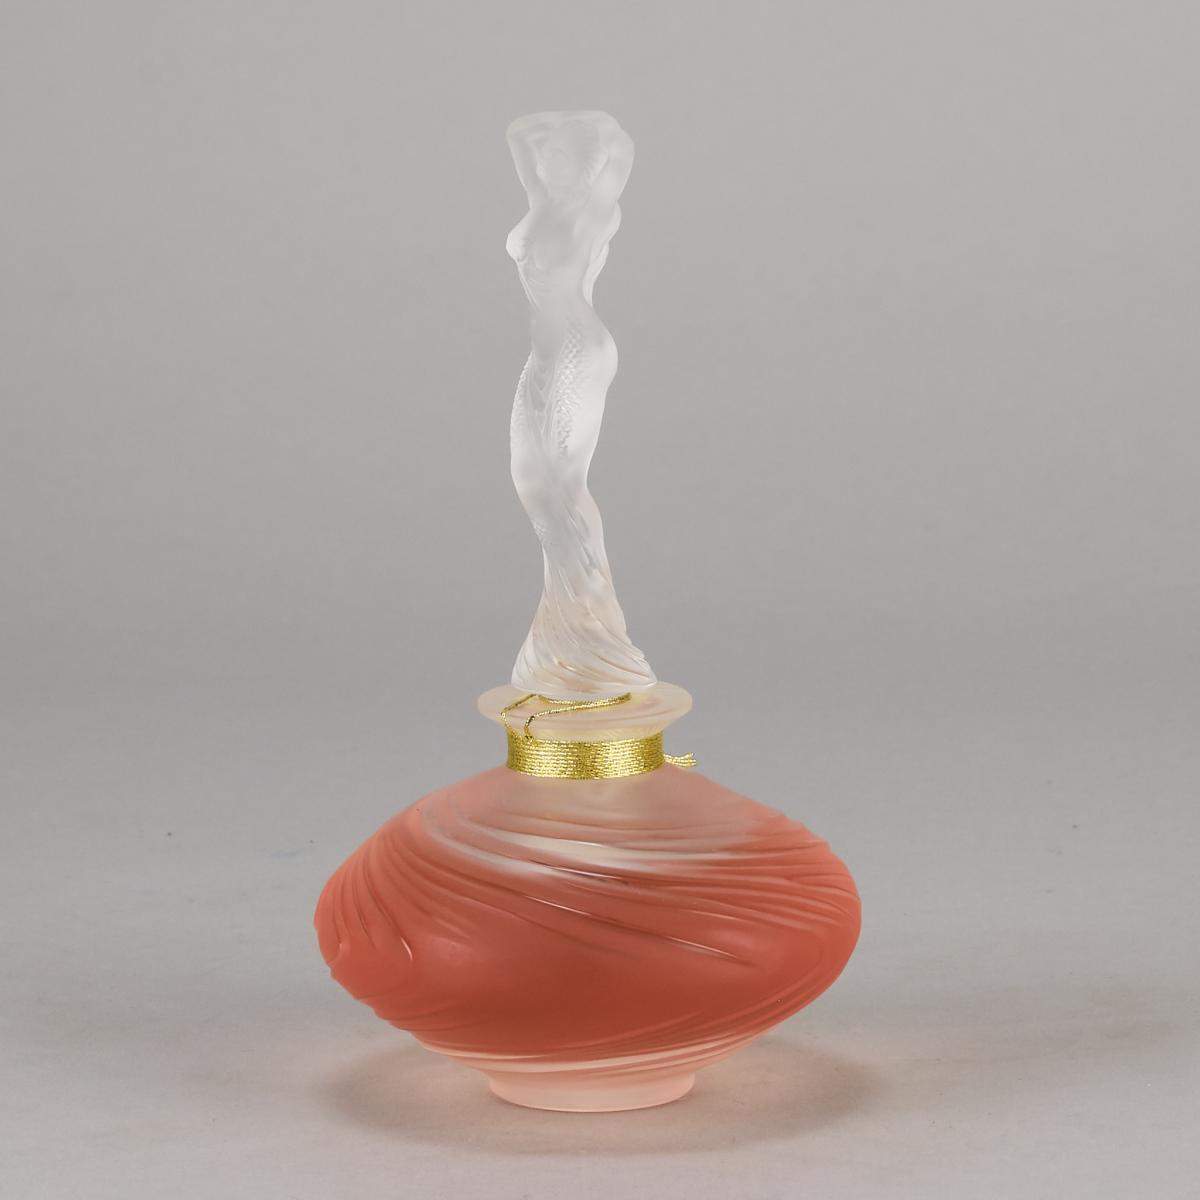  Contemporary Glass Perfume bottle entitled "Naiade" by Lalique Glass